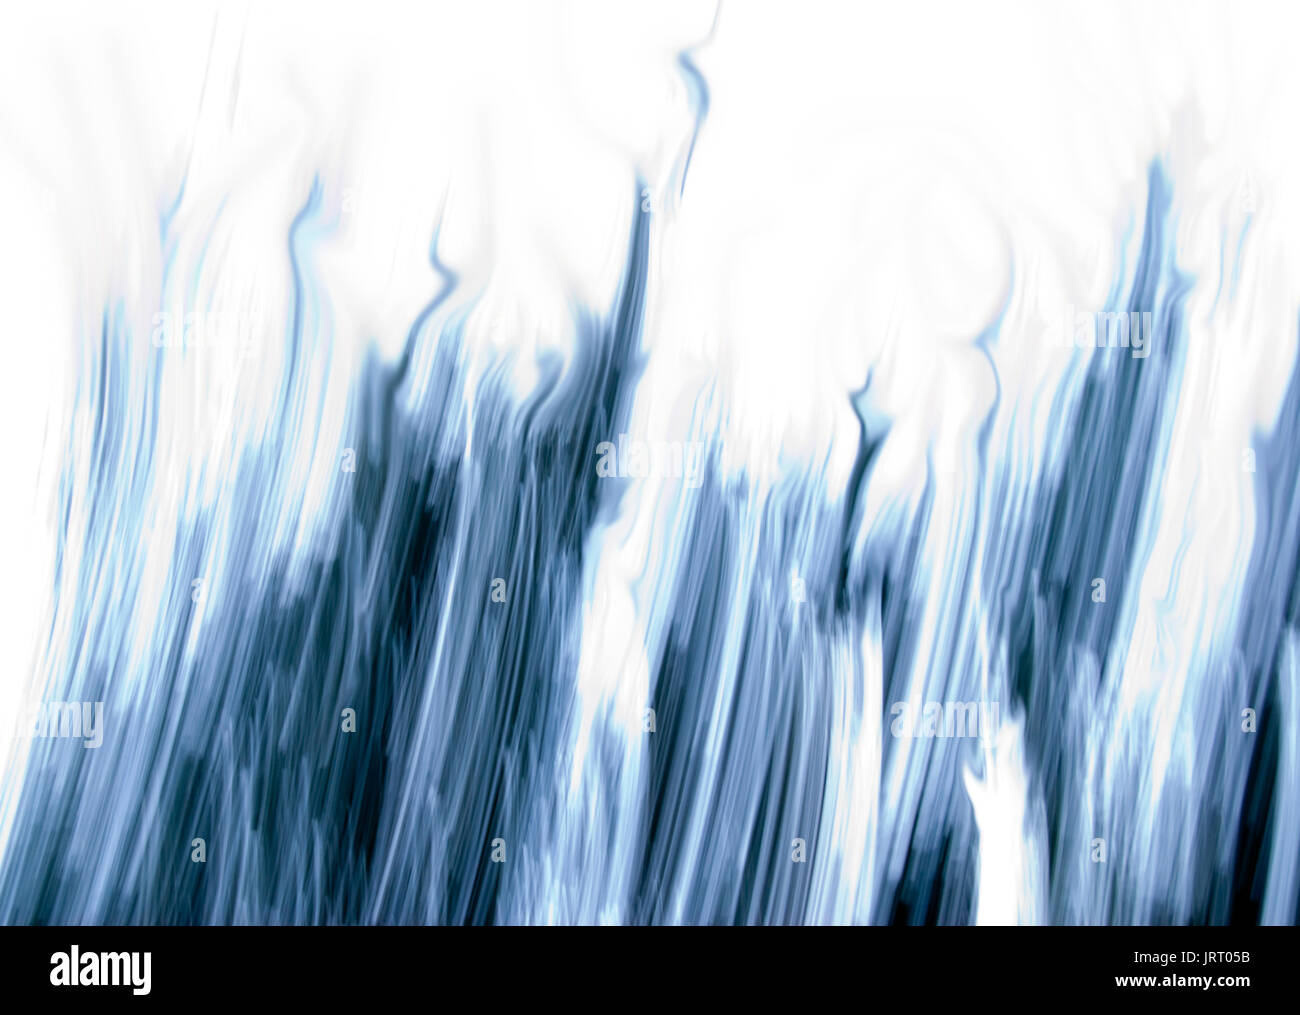 Abstract Background, Blue Design, Graphical, Expressive, Blue Flames, Blue Stripes, Blue Lines, Bizarre, Curve, Strikes, Flashes, Vibrant, Streaks Stock Photo